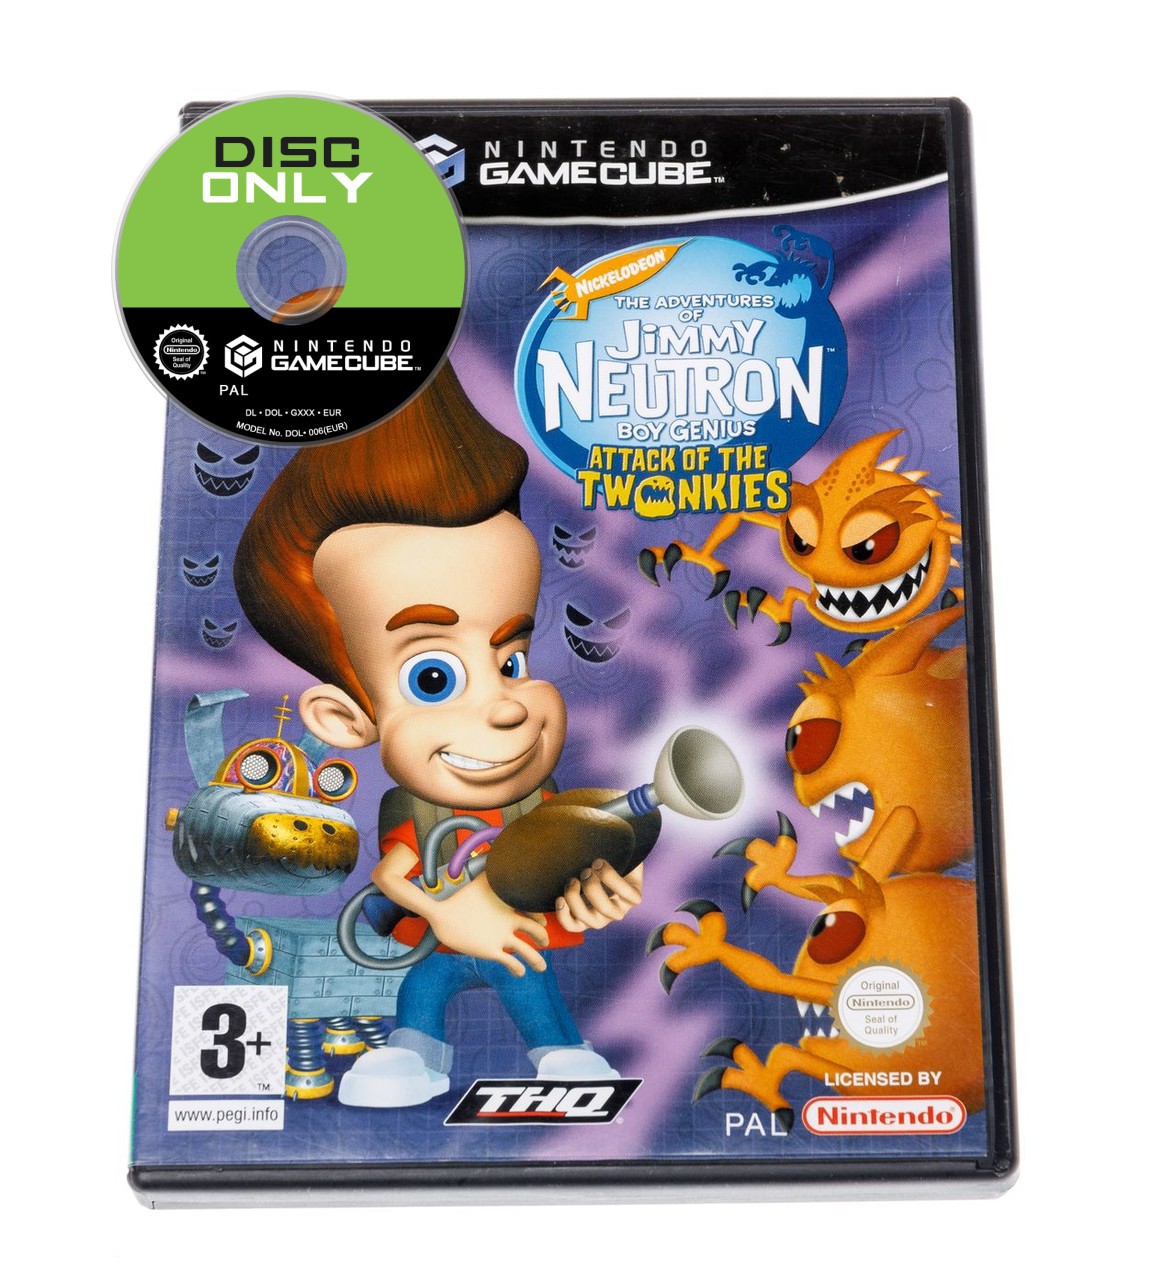 Jimmy Neutron: Attack of the Twonkies - Disc Only Kopen | Gamecube Games